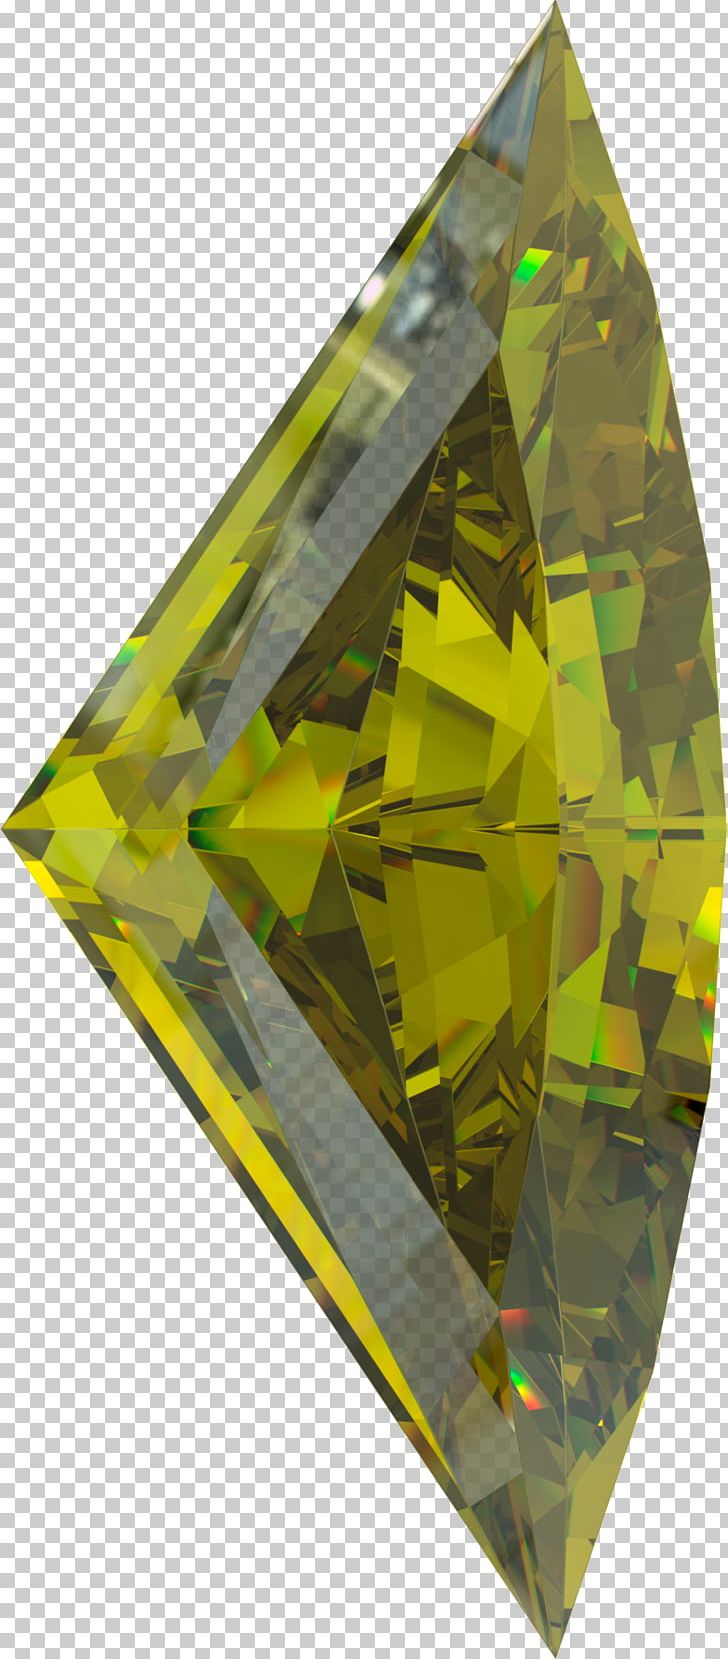 Crystal Gemstone Triangle PNG, Clipart, Crystal, Gemstone, Nature, Triangle, Yellow Free PNG Download